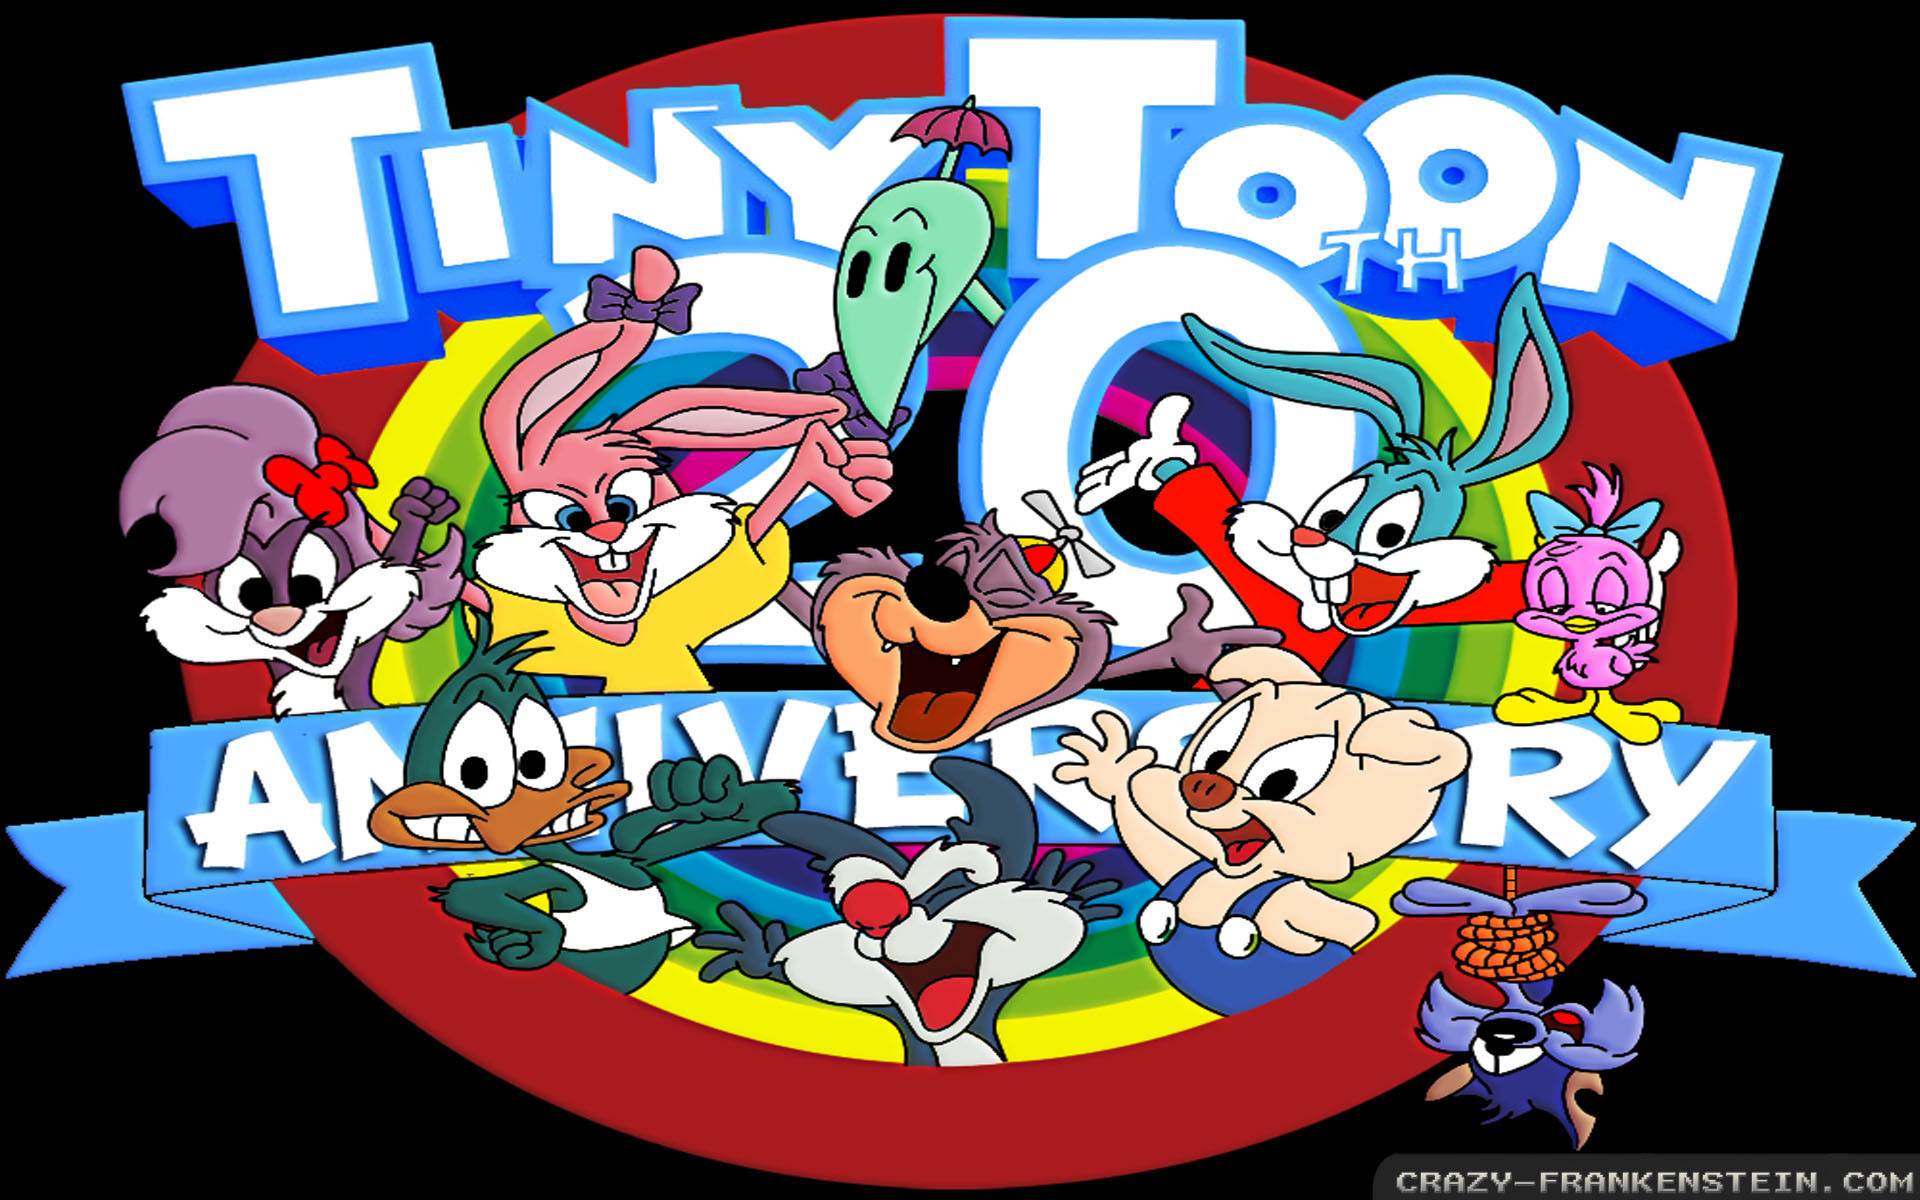 1920x1200 Wallpaper: Intro Tiny Toon adventures wallpapers. Resolution: 1024x768 |  1280x1024 | 1600x1200. Widescreen Res: 1440x900 | 1680x1050 | 